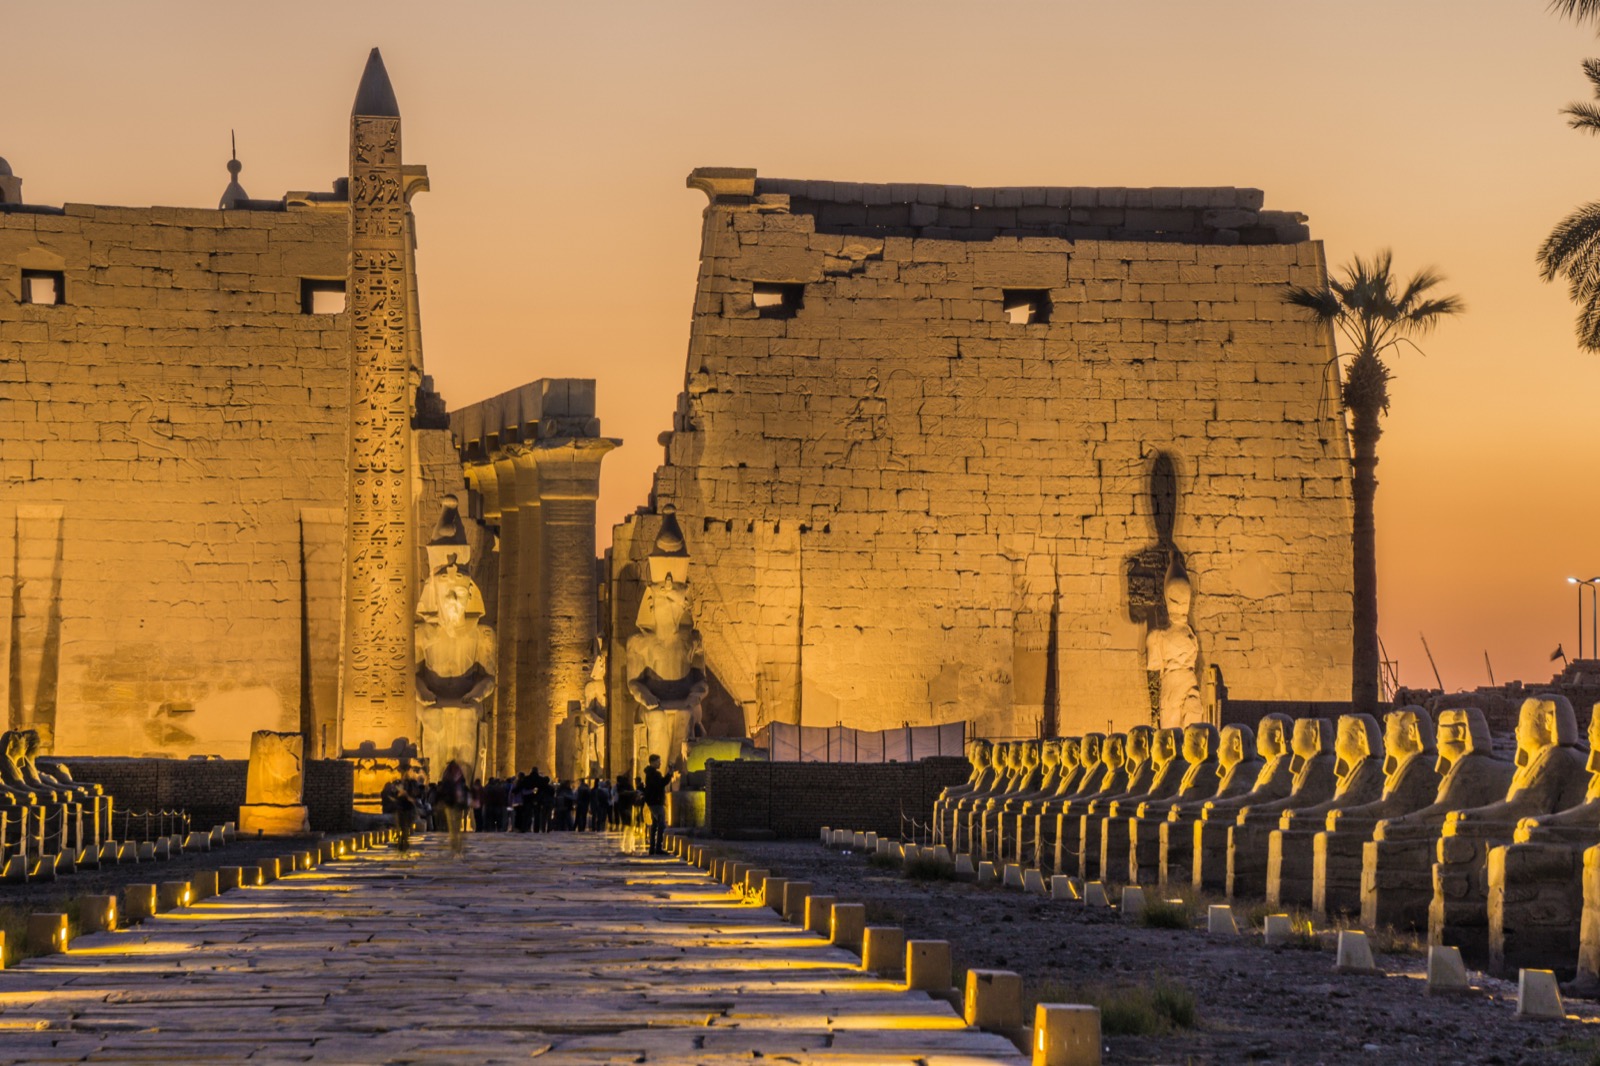 We’ll Give You an 🌮 International Food to Try Based on the ✈️ Places You Would Rather Visit Sunset At Luxor Temple, Egypt